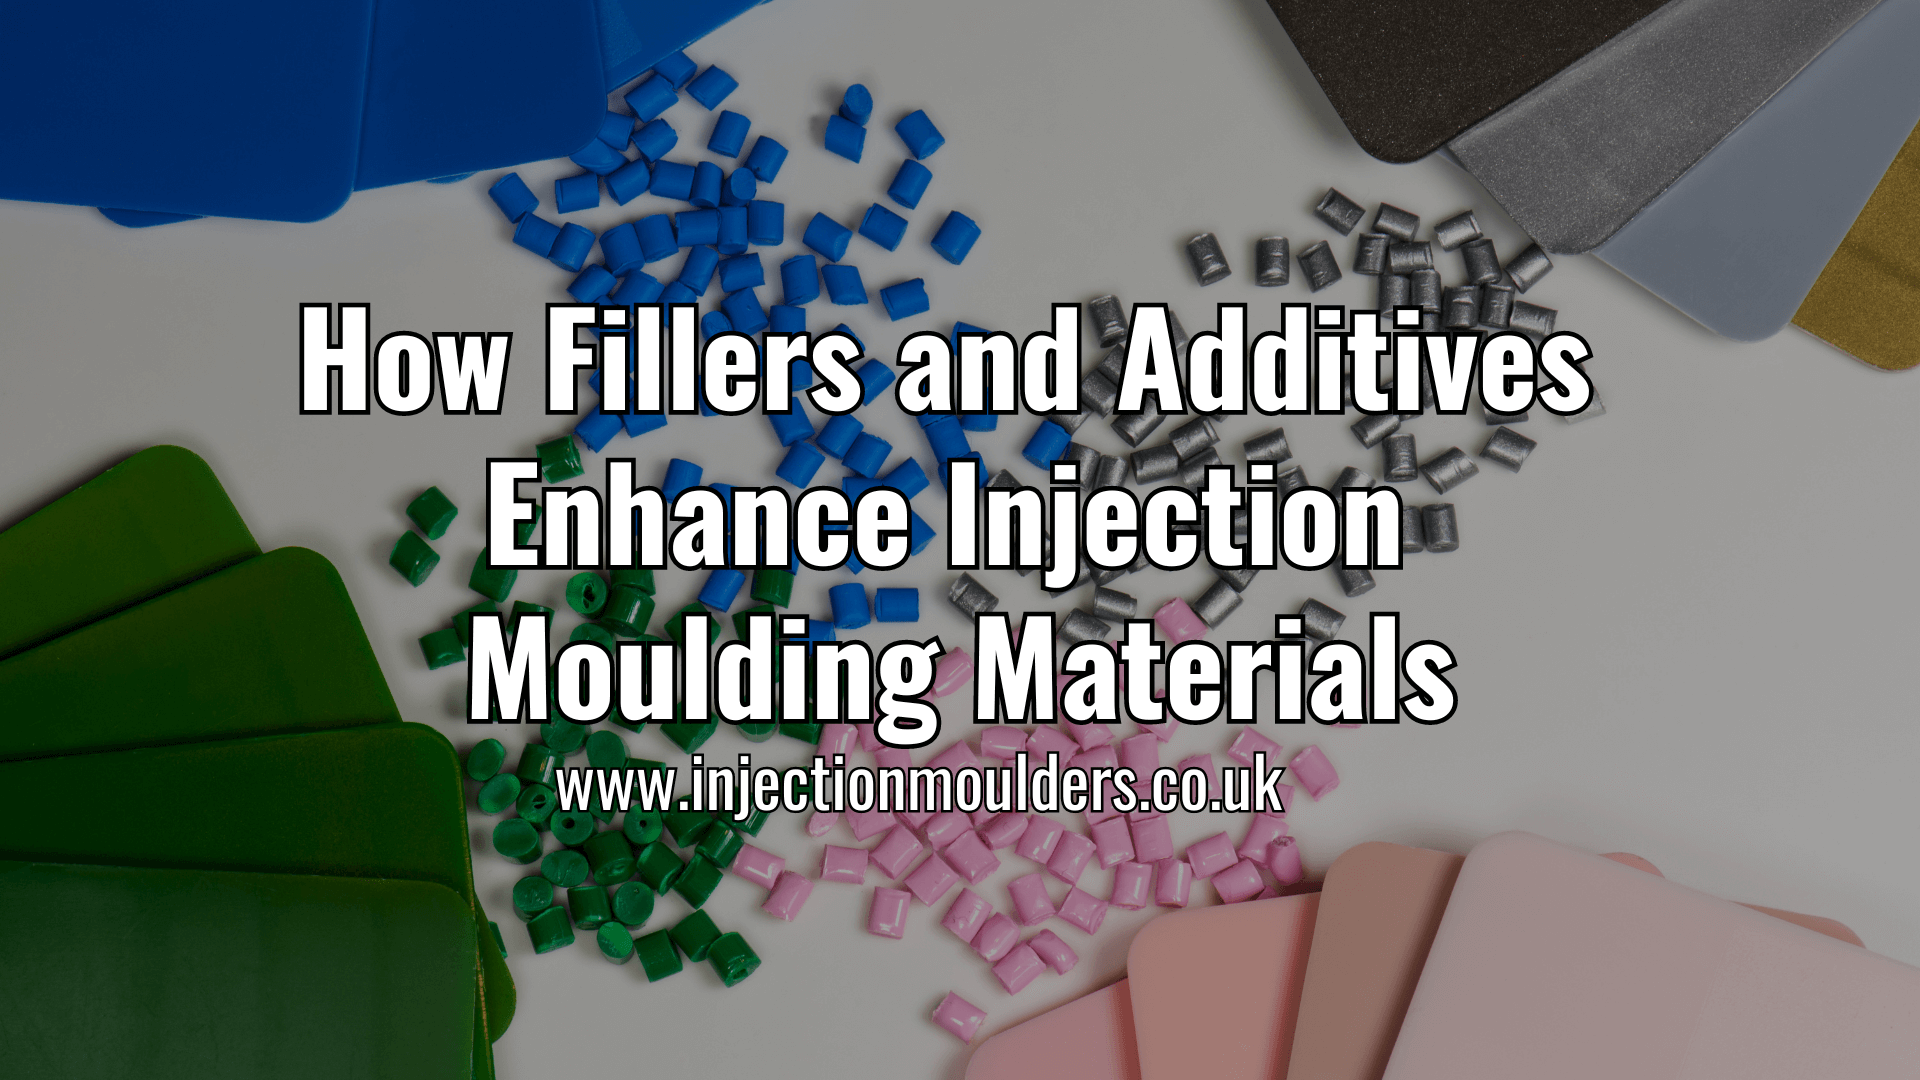 How Fillers and Additives Enhance Injection Moulding Materials